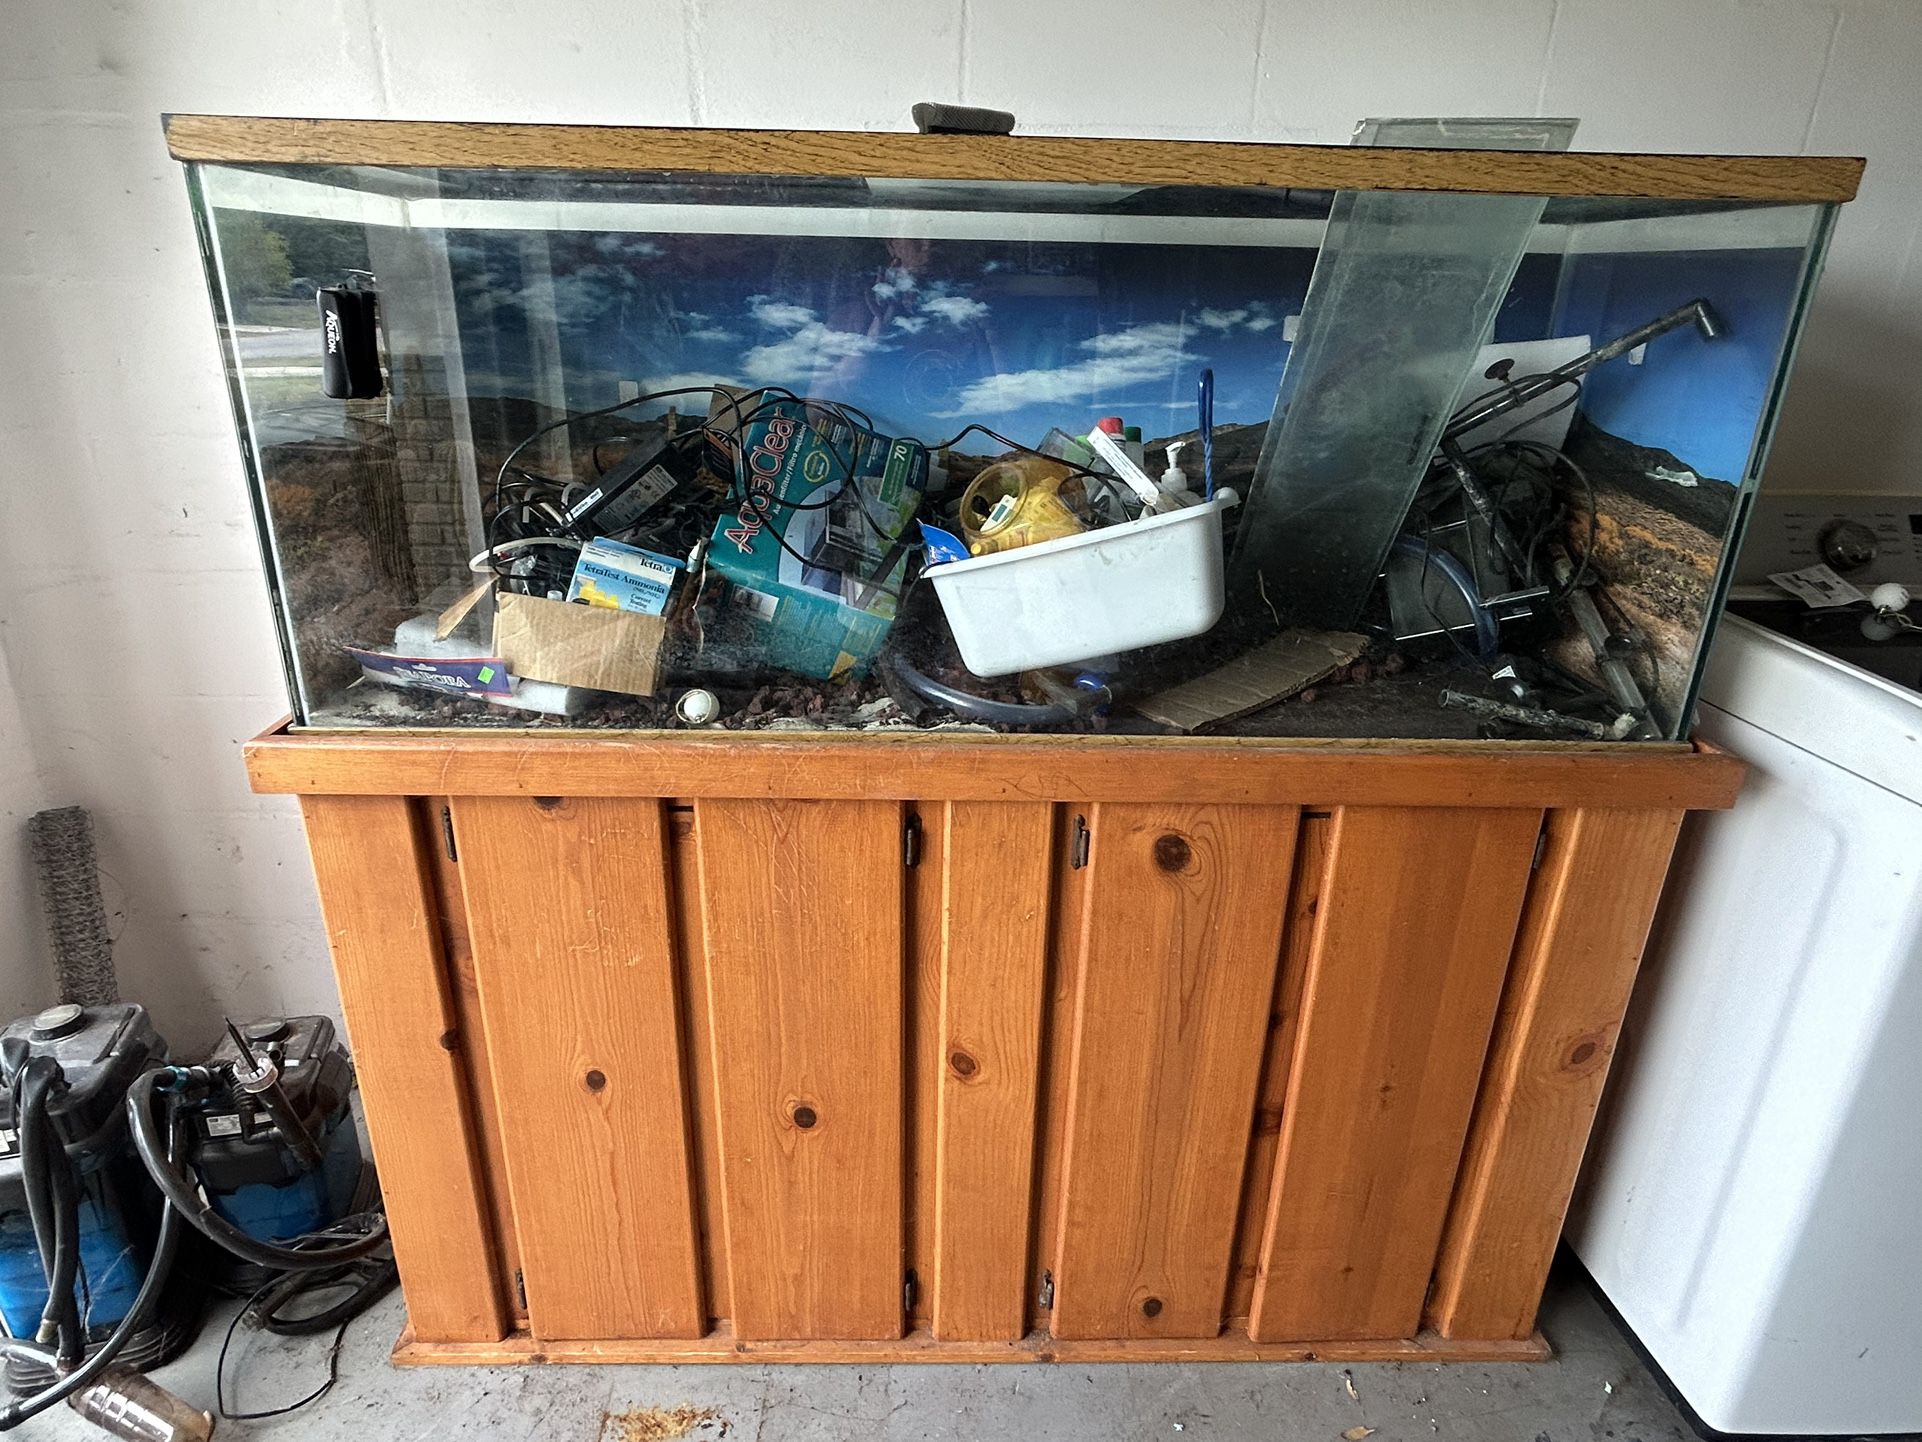 110 Gallon Glass Aquarium With Solid Wood Stand And Tons Of Supplies